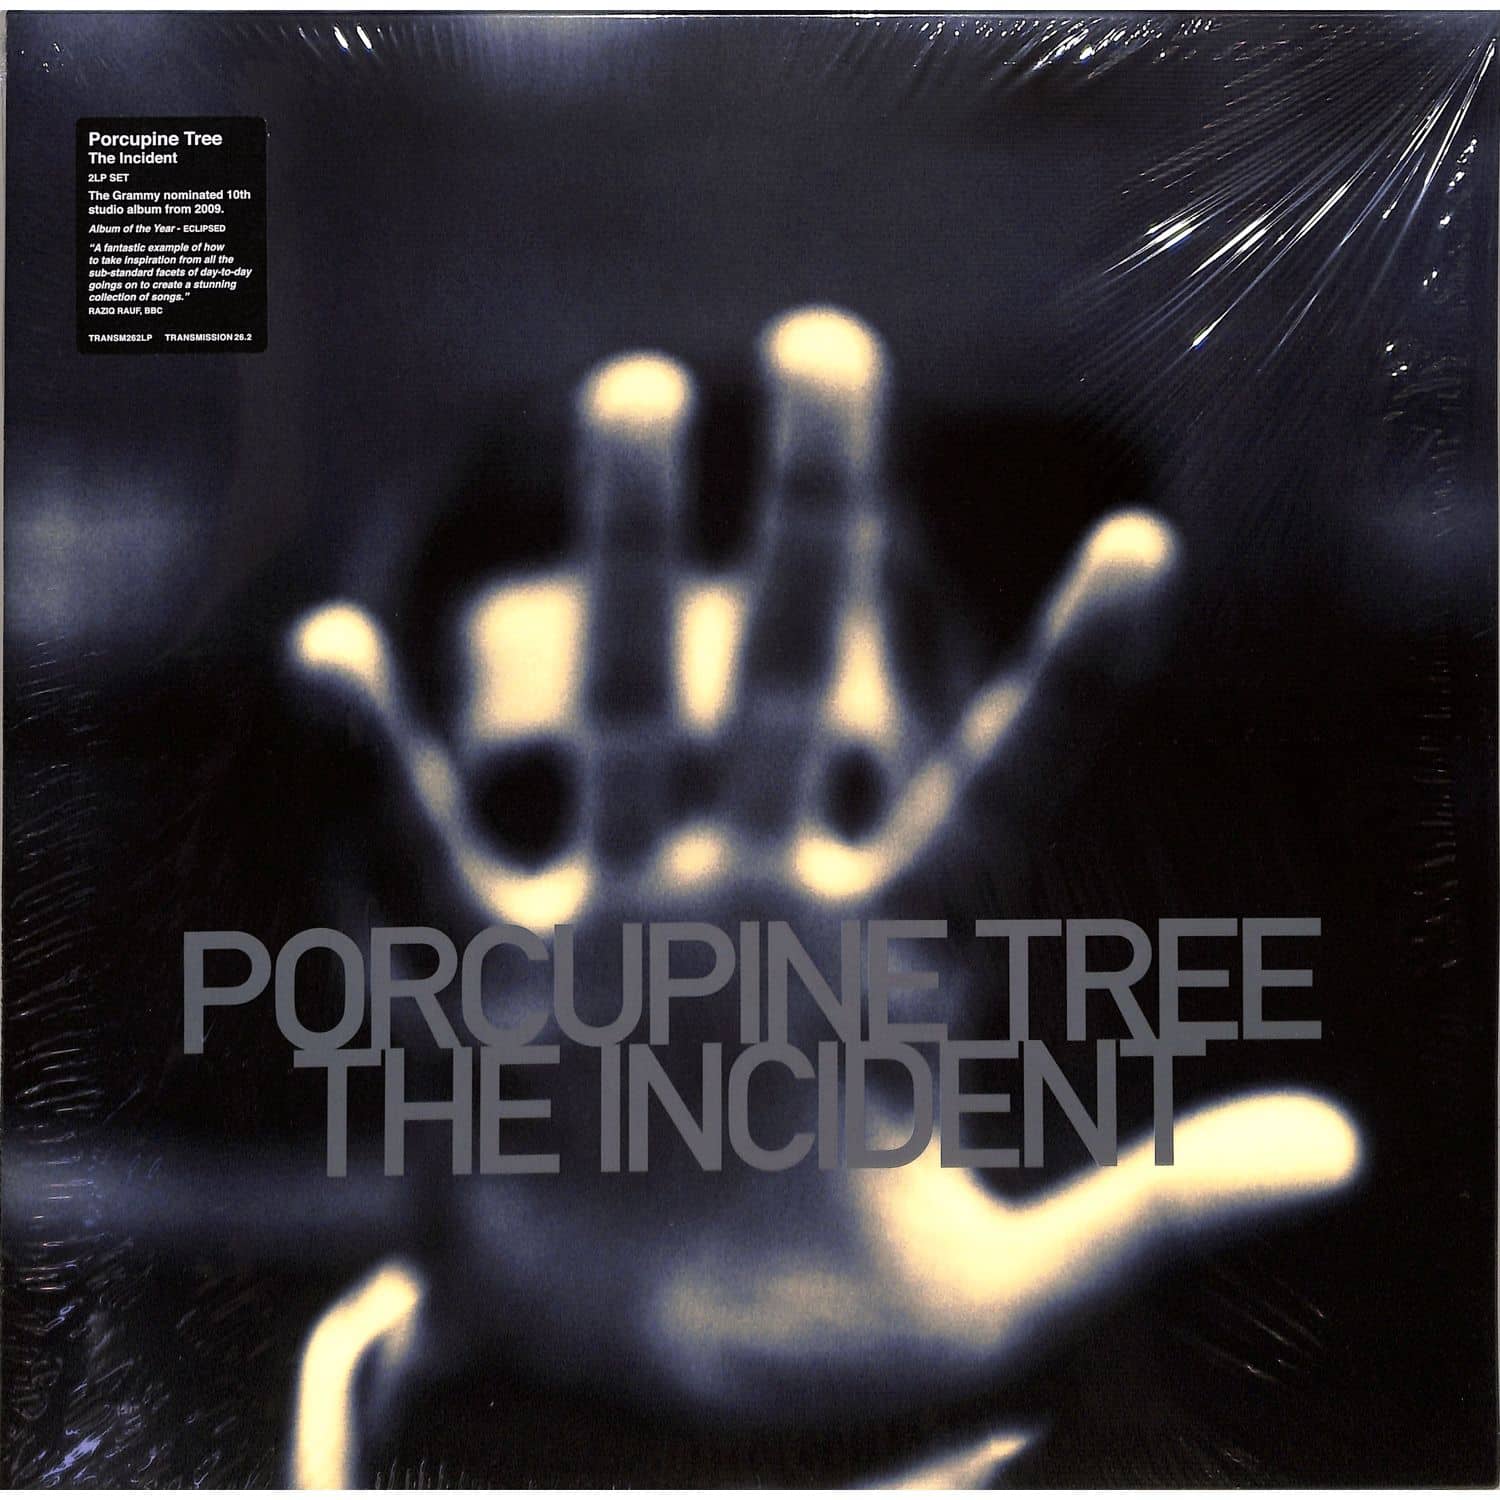 Porcupine Tree - THE INCIDENT 